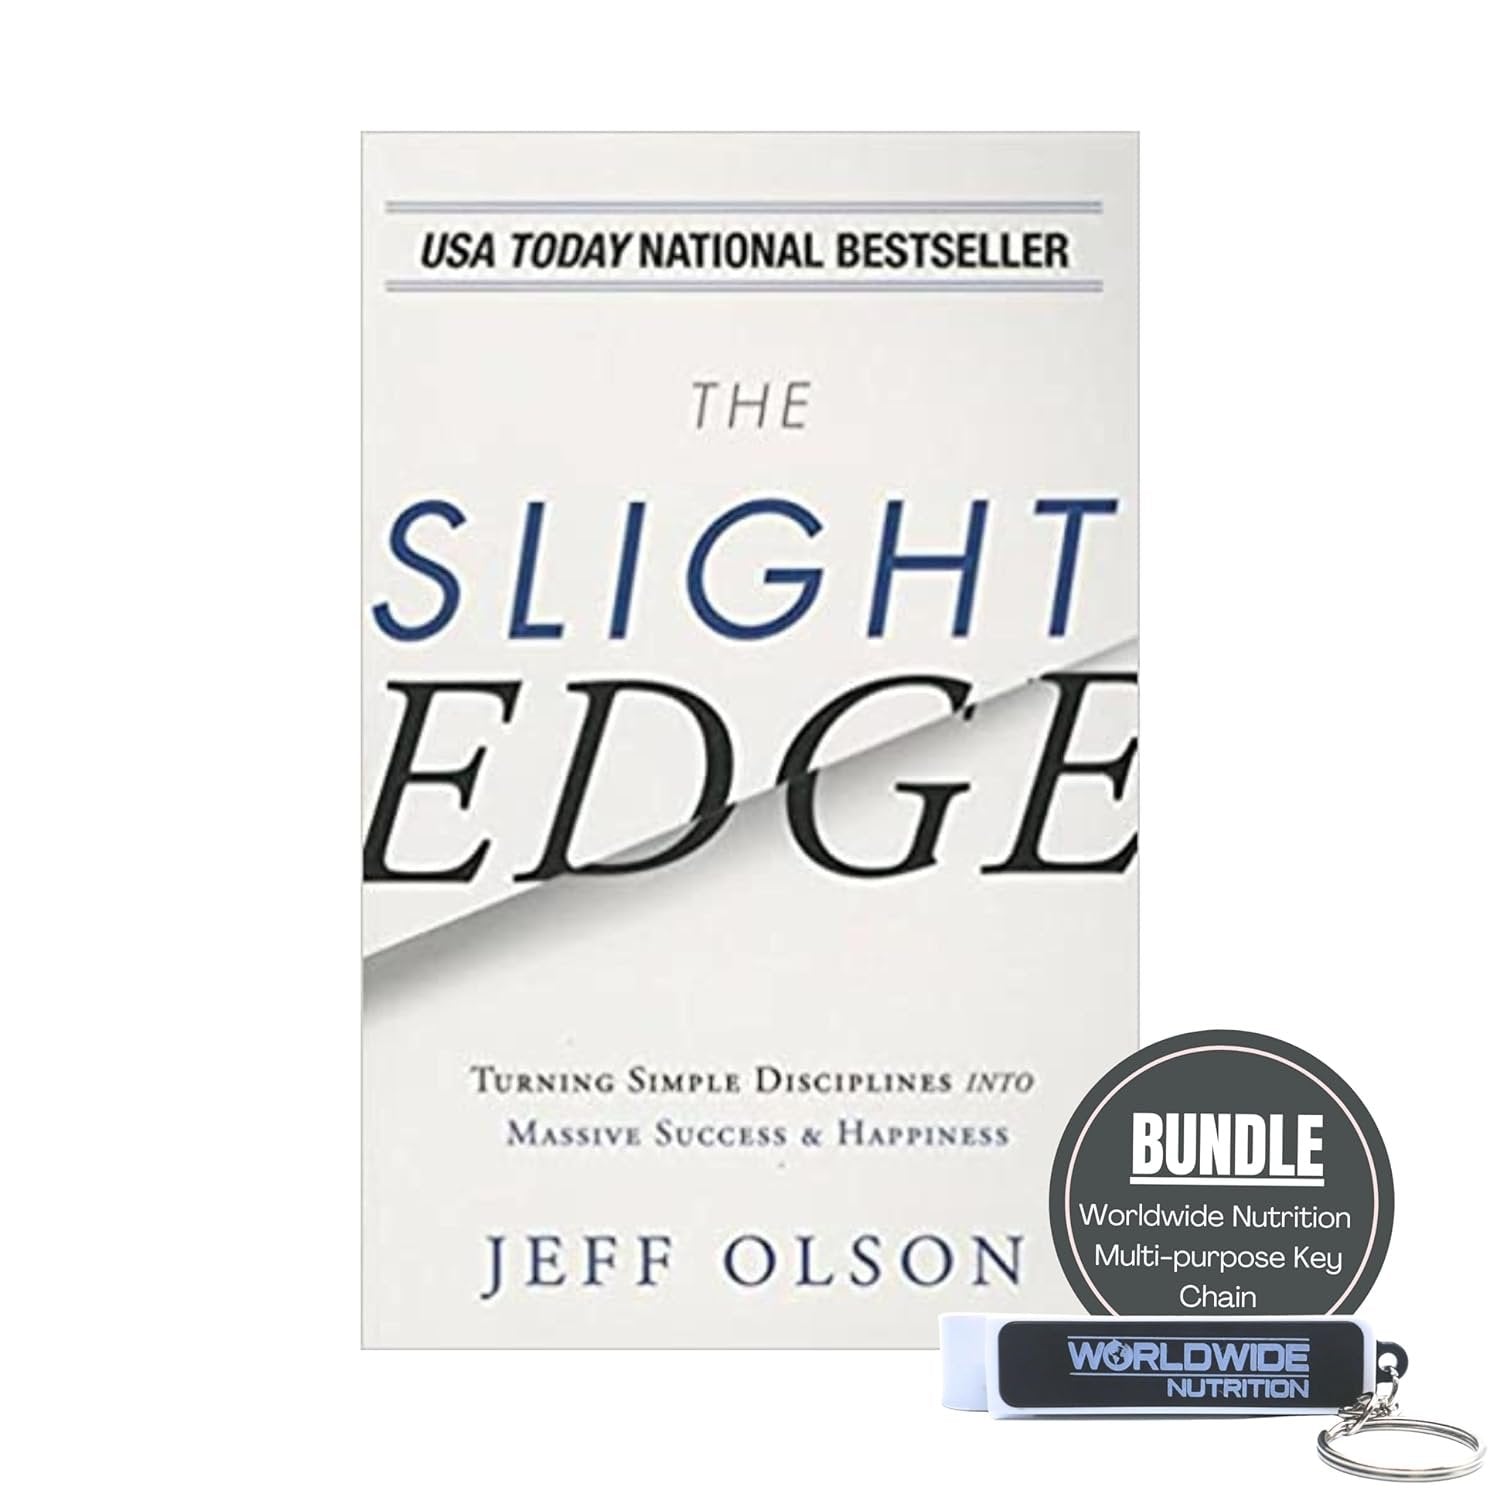 The Slight Edge - Turning Simple Disciplines Into Massive Success & Happiness - by Jeff Olson (Author) - Paperback